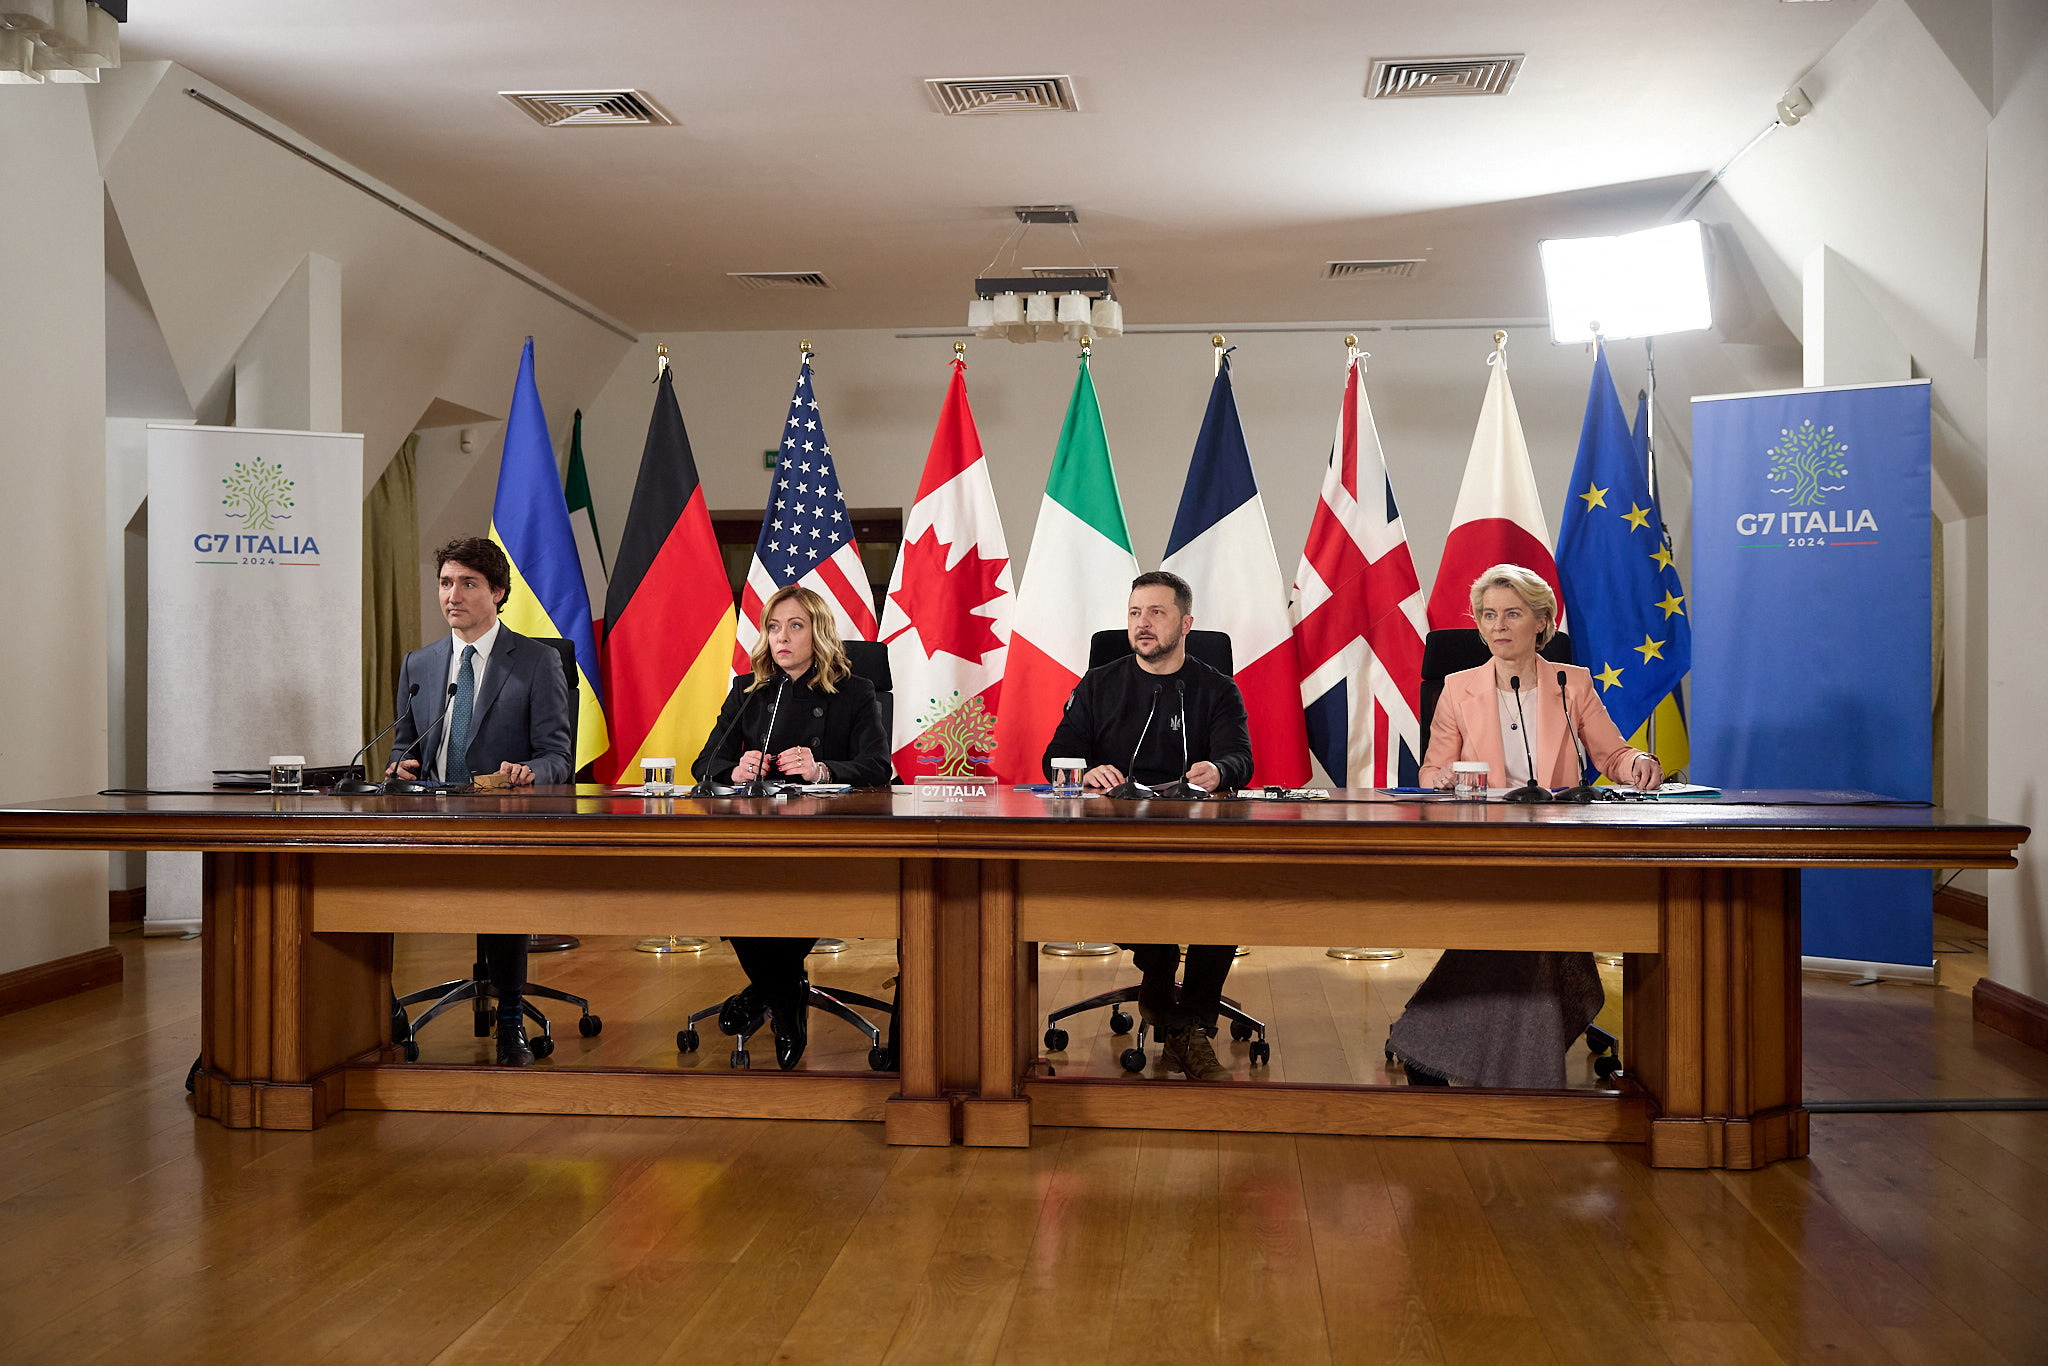 Canadian Prime Minister Justin Trudeau, left, Italian Prime Minister Giorgia Meloni, Ukrainian President Volodymyr Zelensky and European Commission President Ursula von der Leyen attend a video conference with G7 leaders in Kyiv, Ukraine, on February 24.